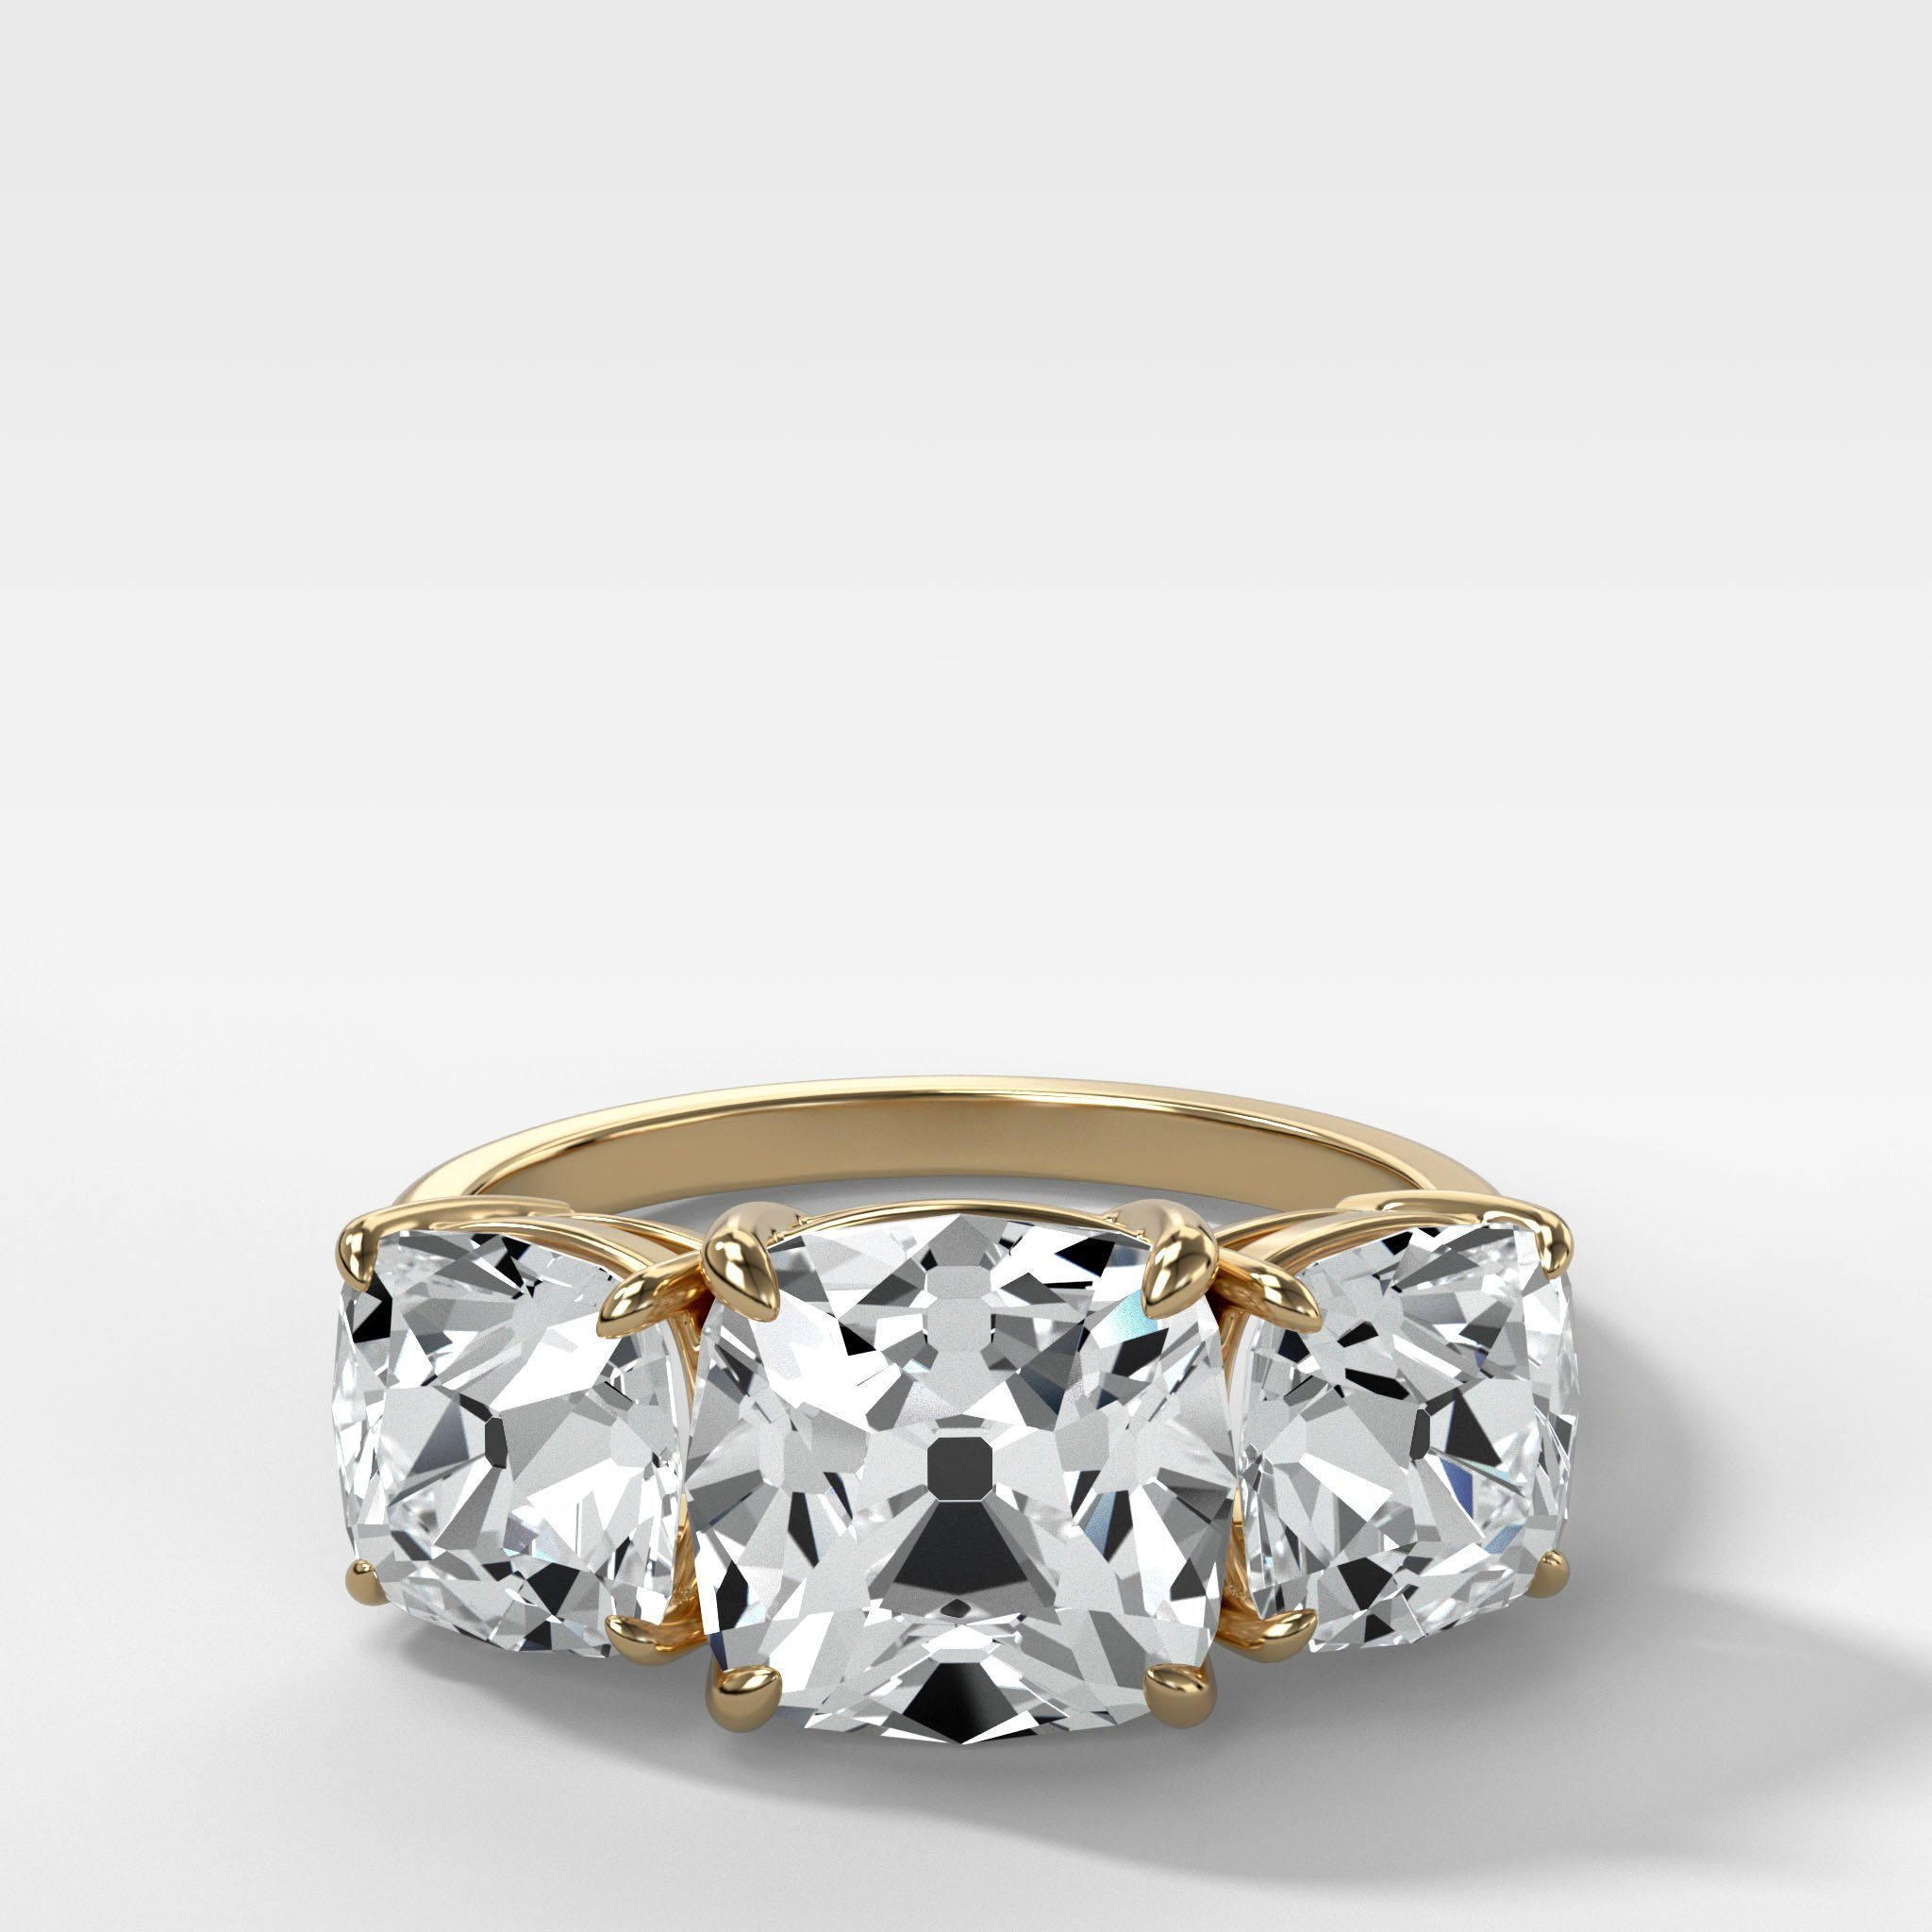 GOODSTONE Triad Engagement Ring With Old Mine Cut Diamonds